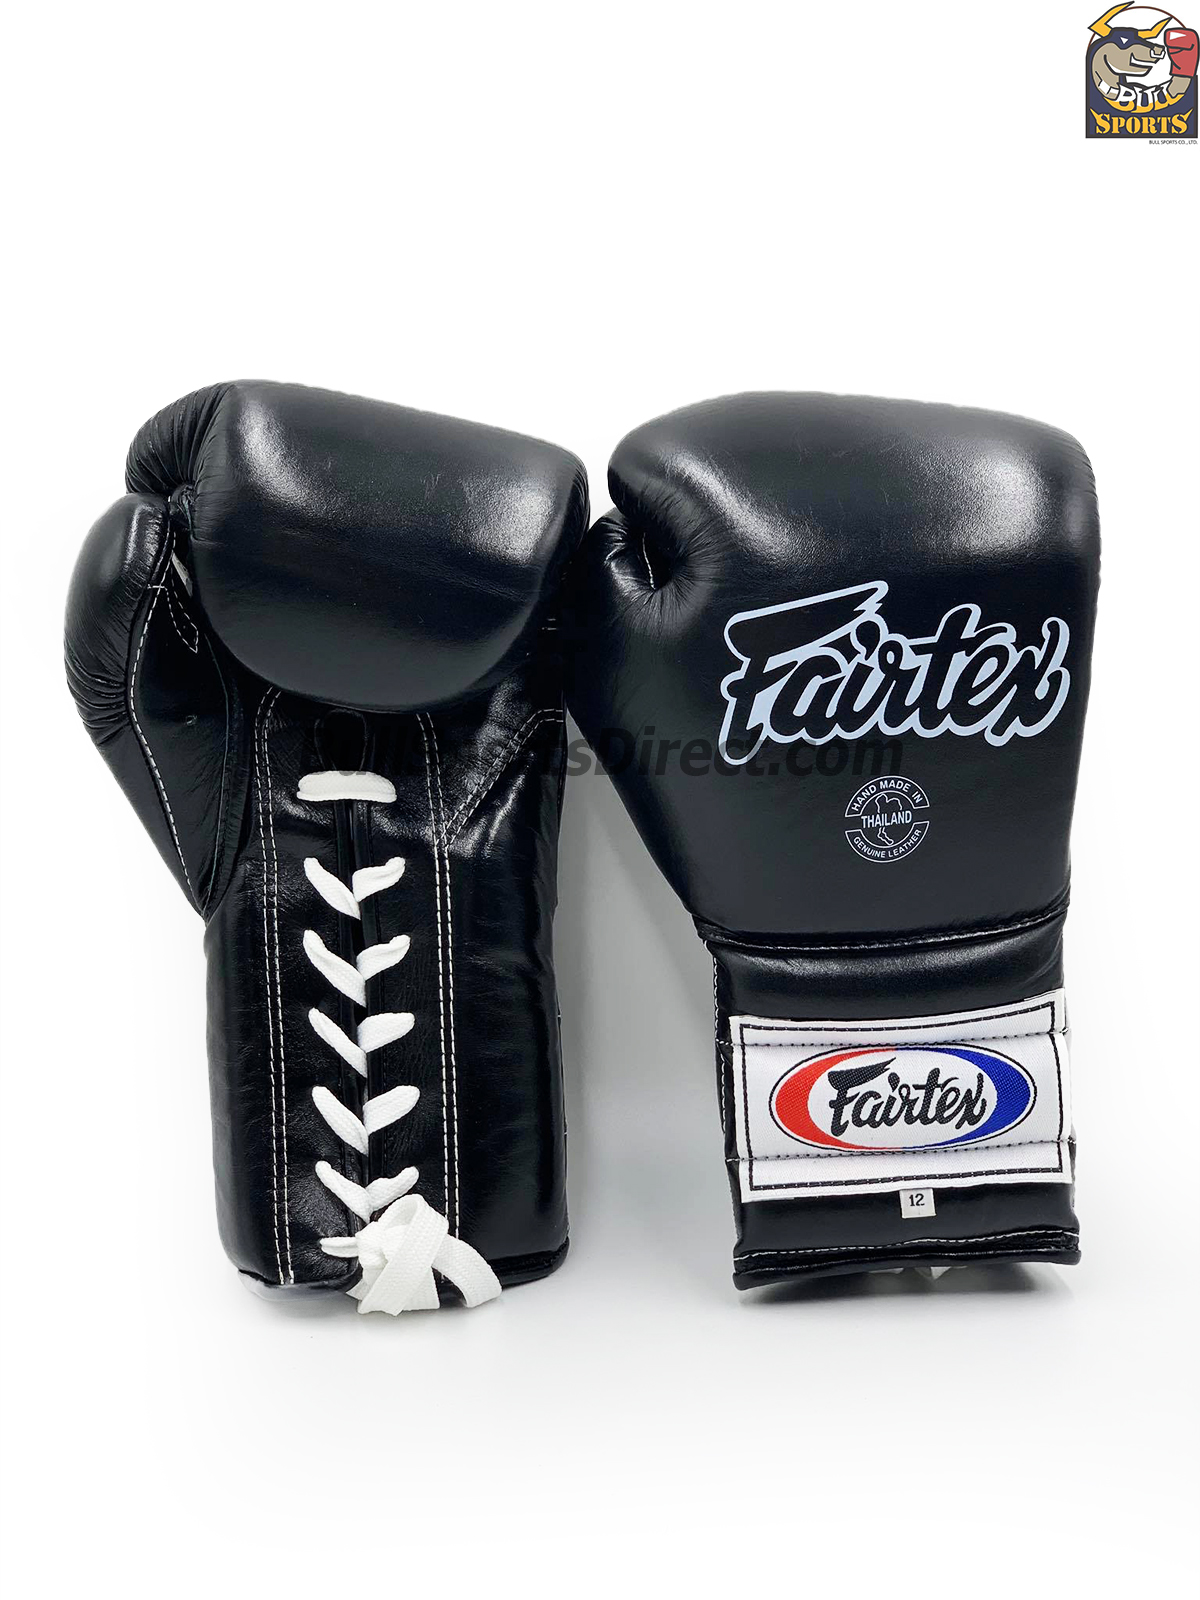 FAIRTEX BGL7 BLACK WHITE MEXICAN STYLE LACE UP BOXING GLOVES MMA K1 